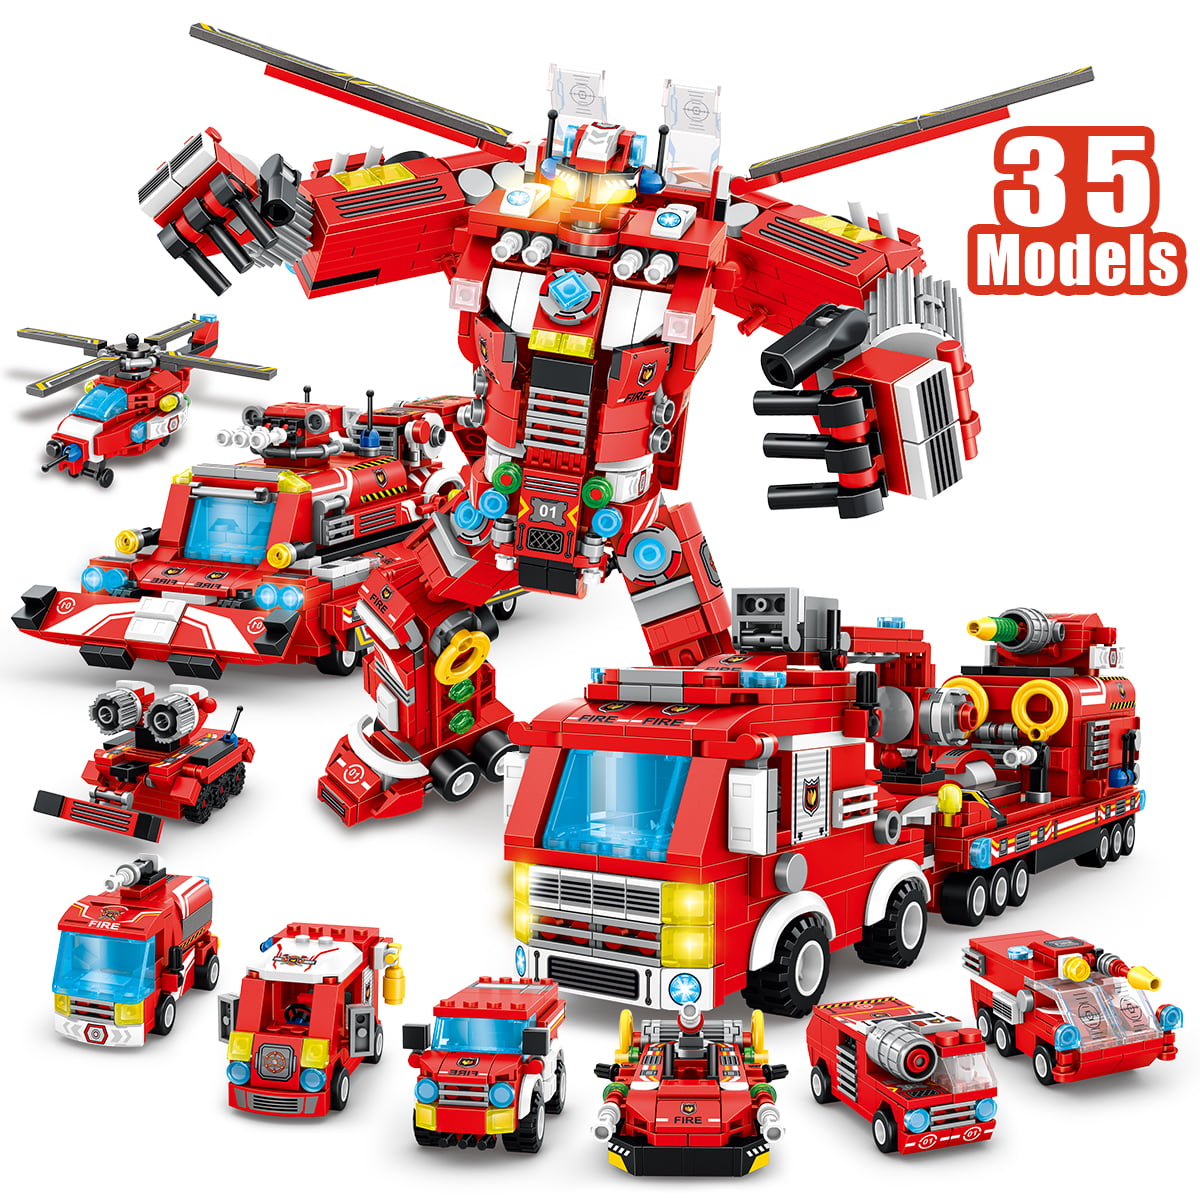 35-in-1 STEM Kit Kids Toy for Kids Boy Girl FUN Teens Robot FOR FUTURE ENGINEERS 